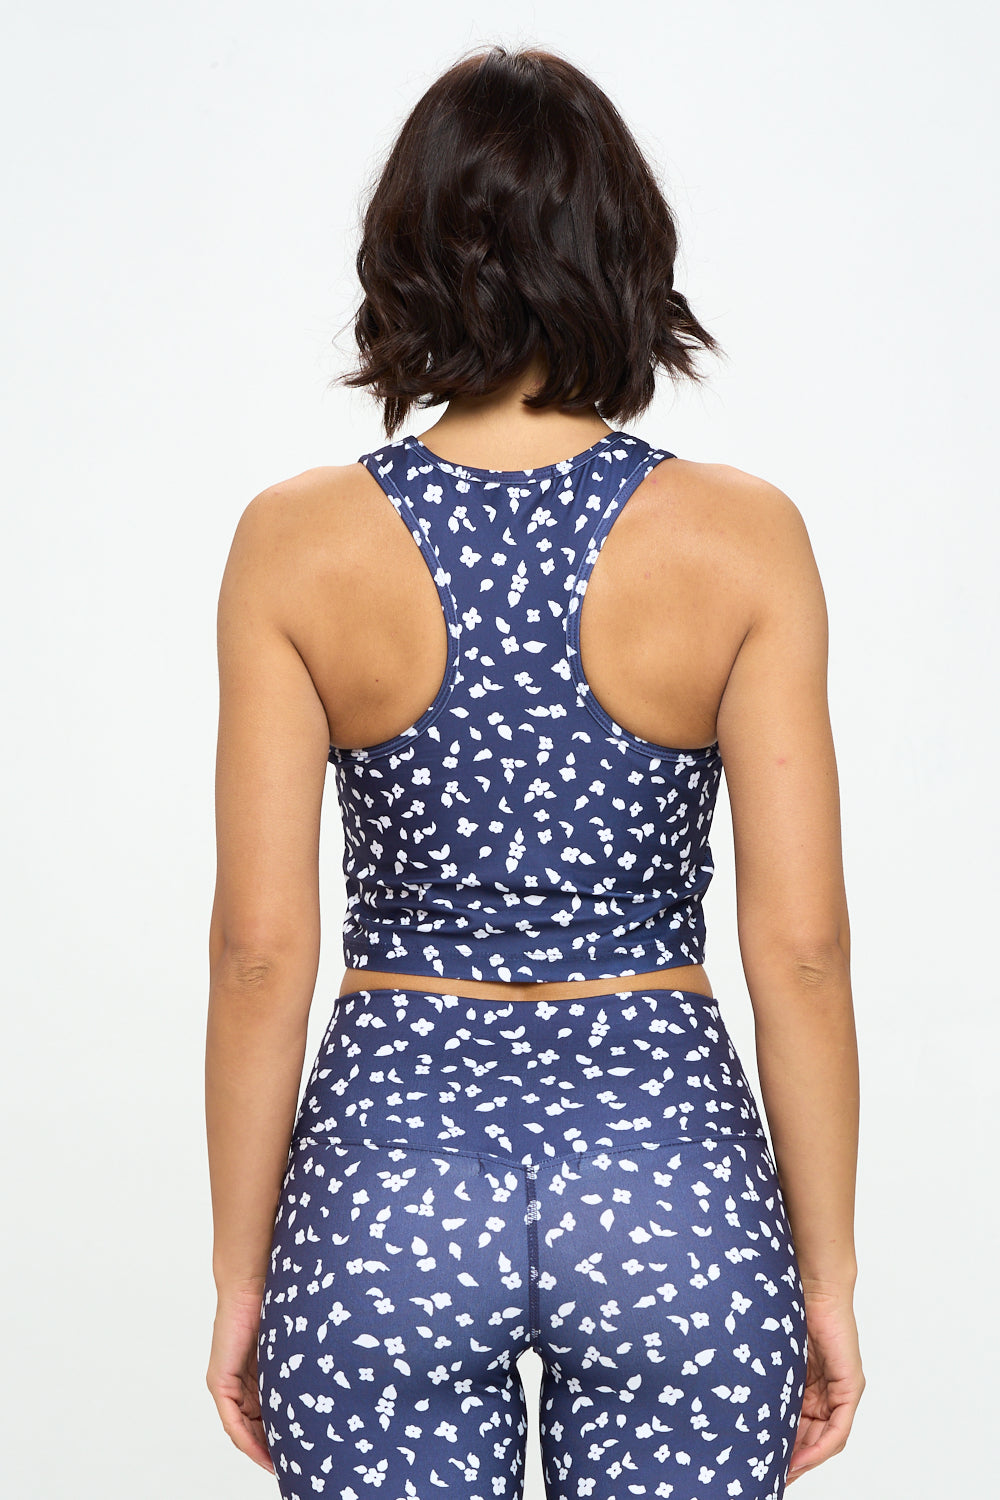 Paige - Navy White Floral Spots Compression Crop Tank (Built-in support) - LIMITED EDITION